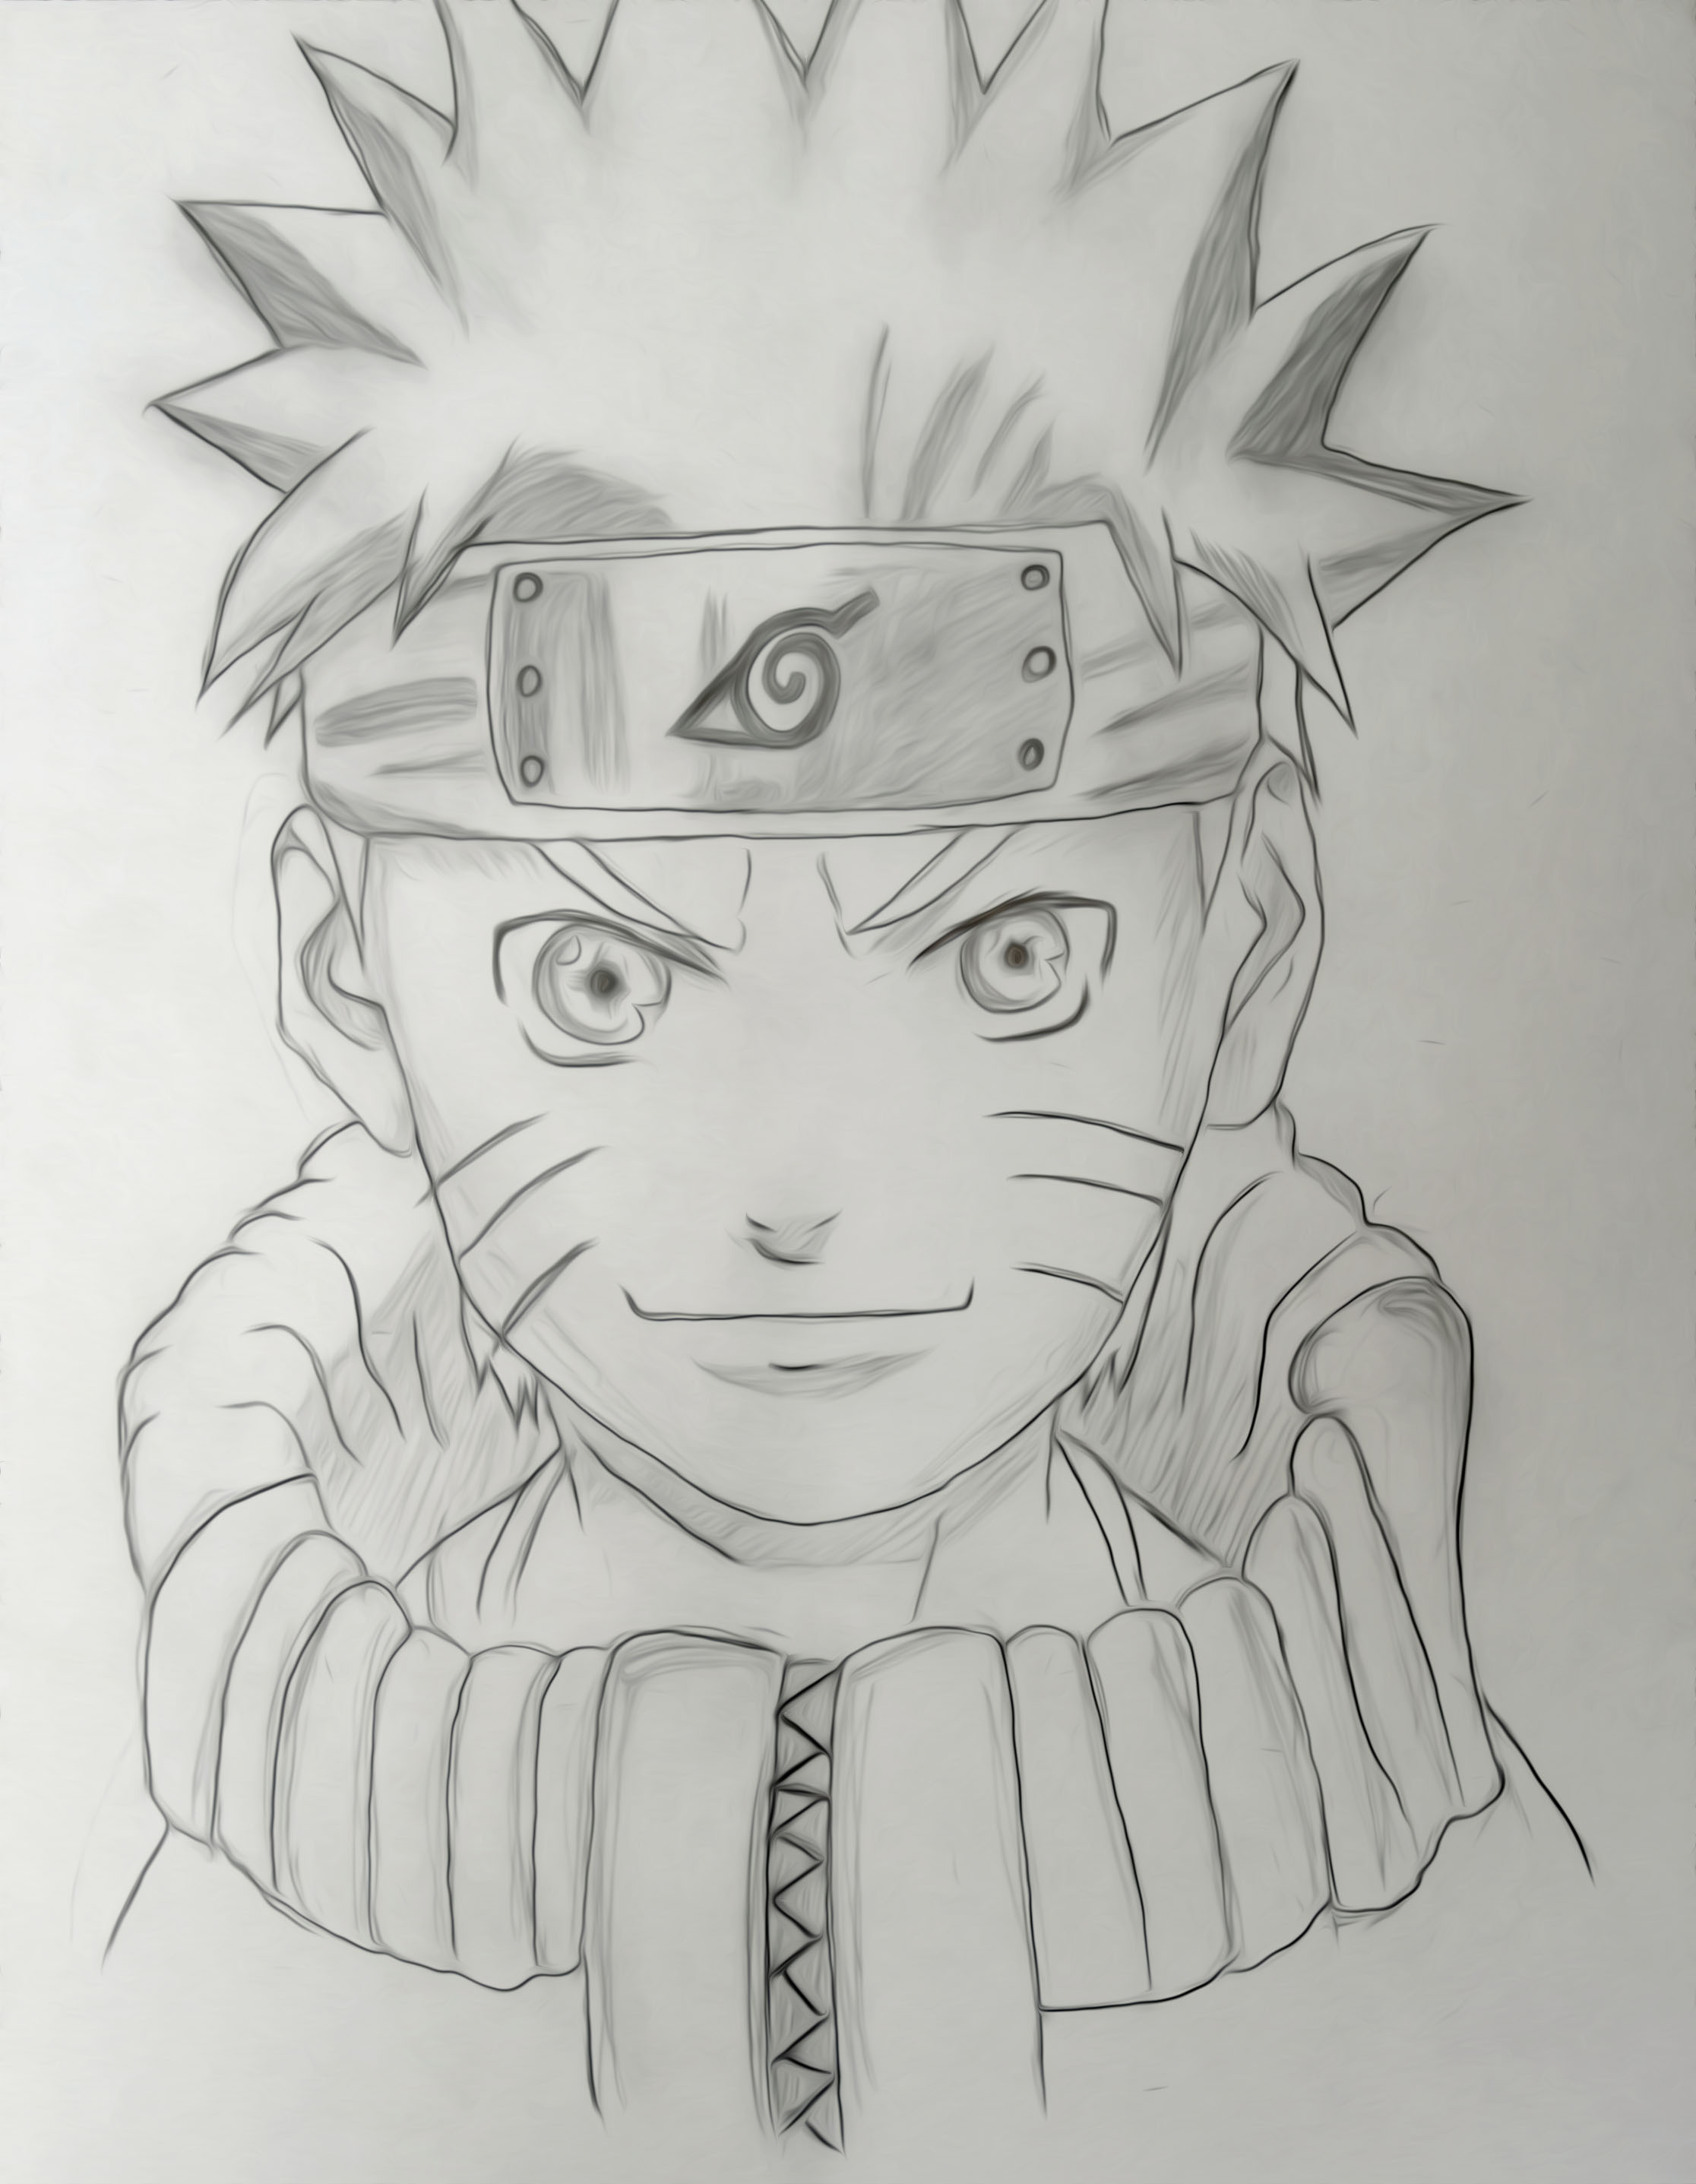 Anime Things To Draw Naruto How To Draw Naruto Easy Step By Step Naruto Characters Anime